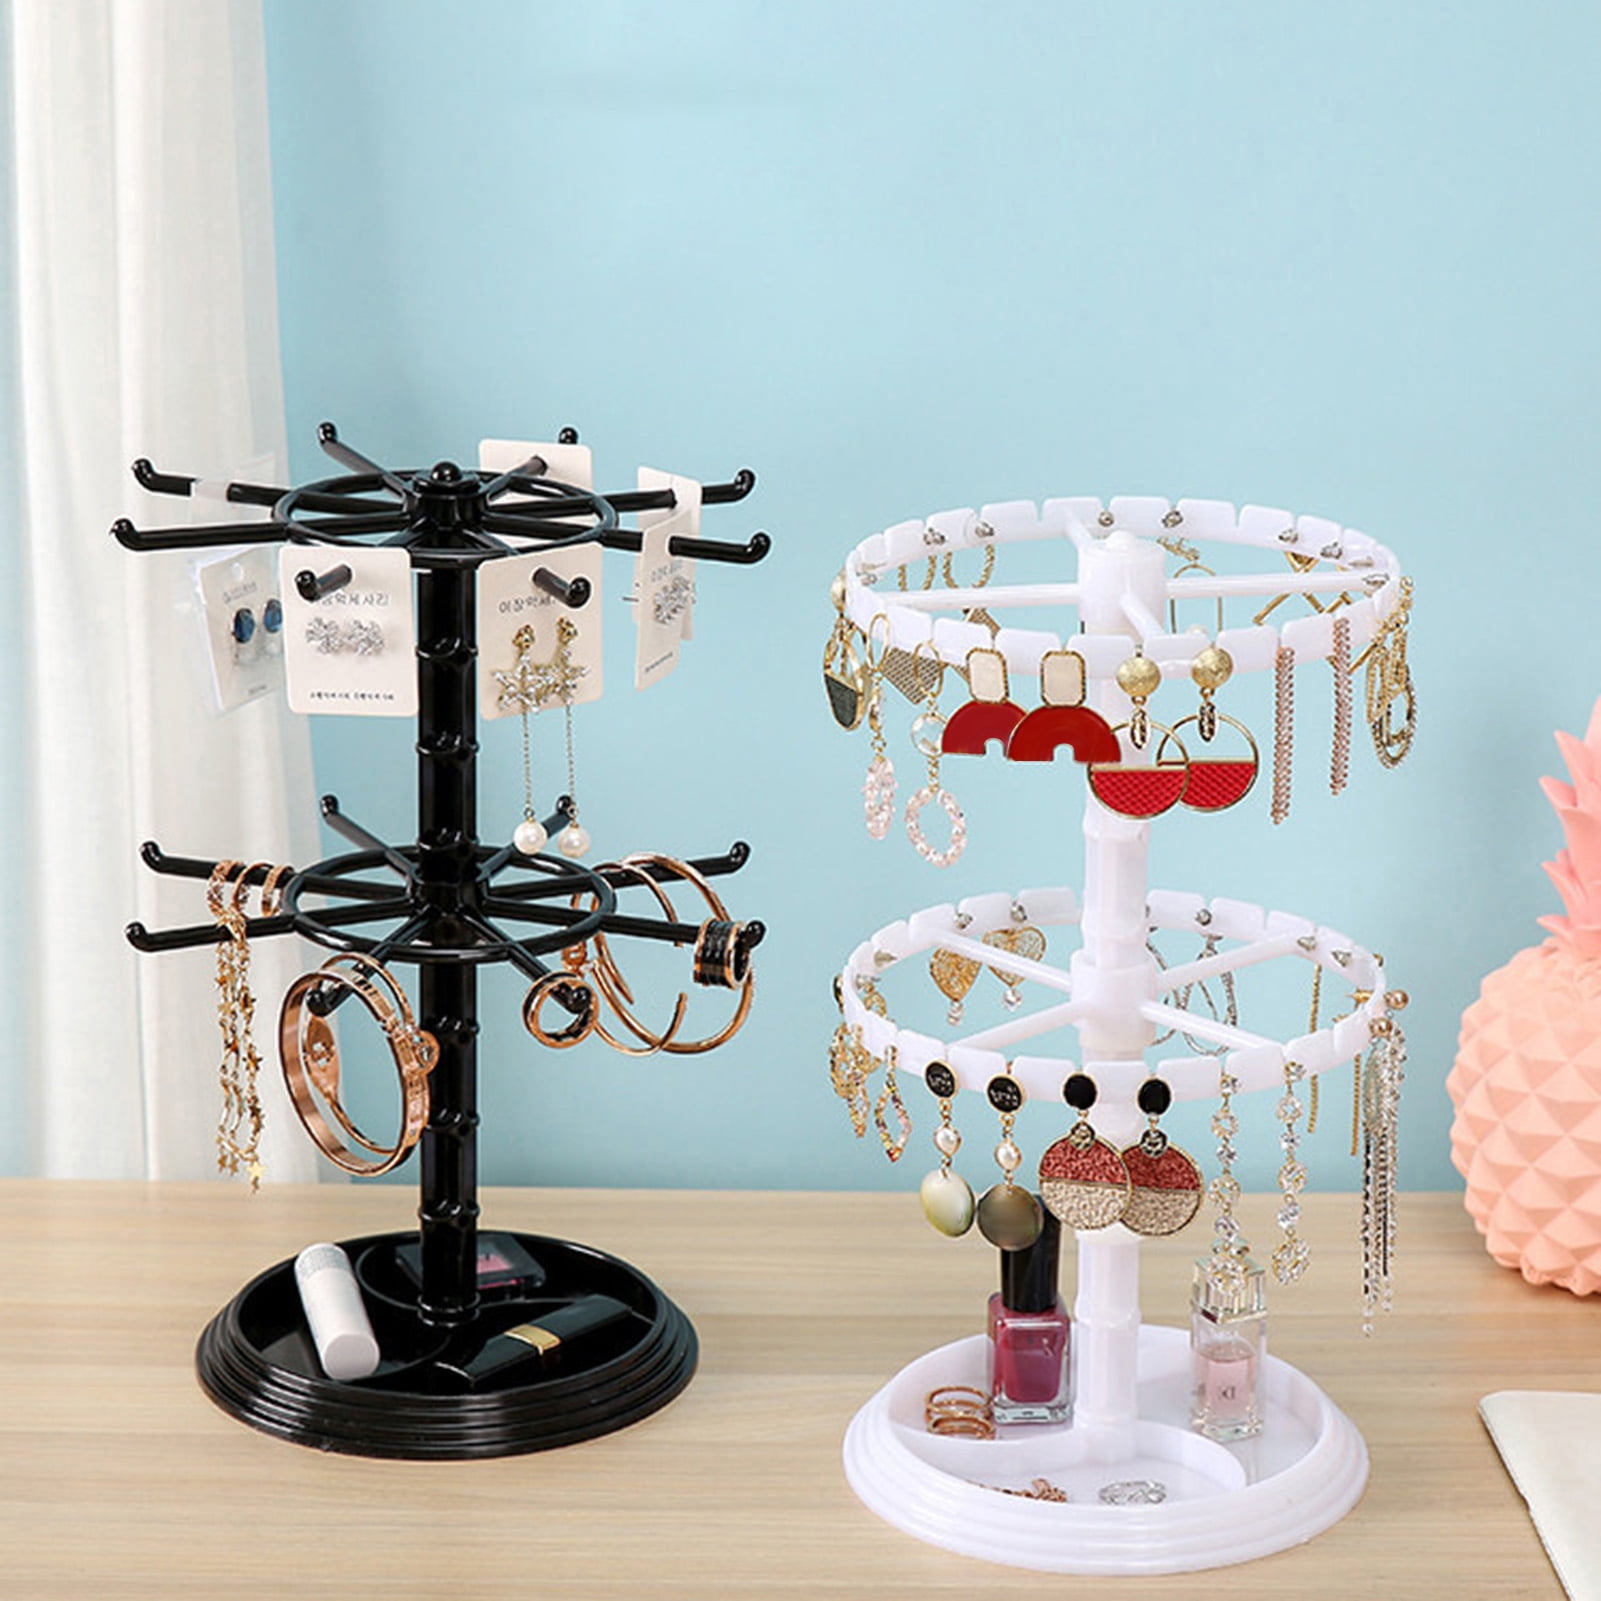 Details about   Gold Earring Rack Jewelry Organizer Holder Display Stand Jewelry Display Stand